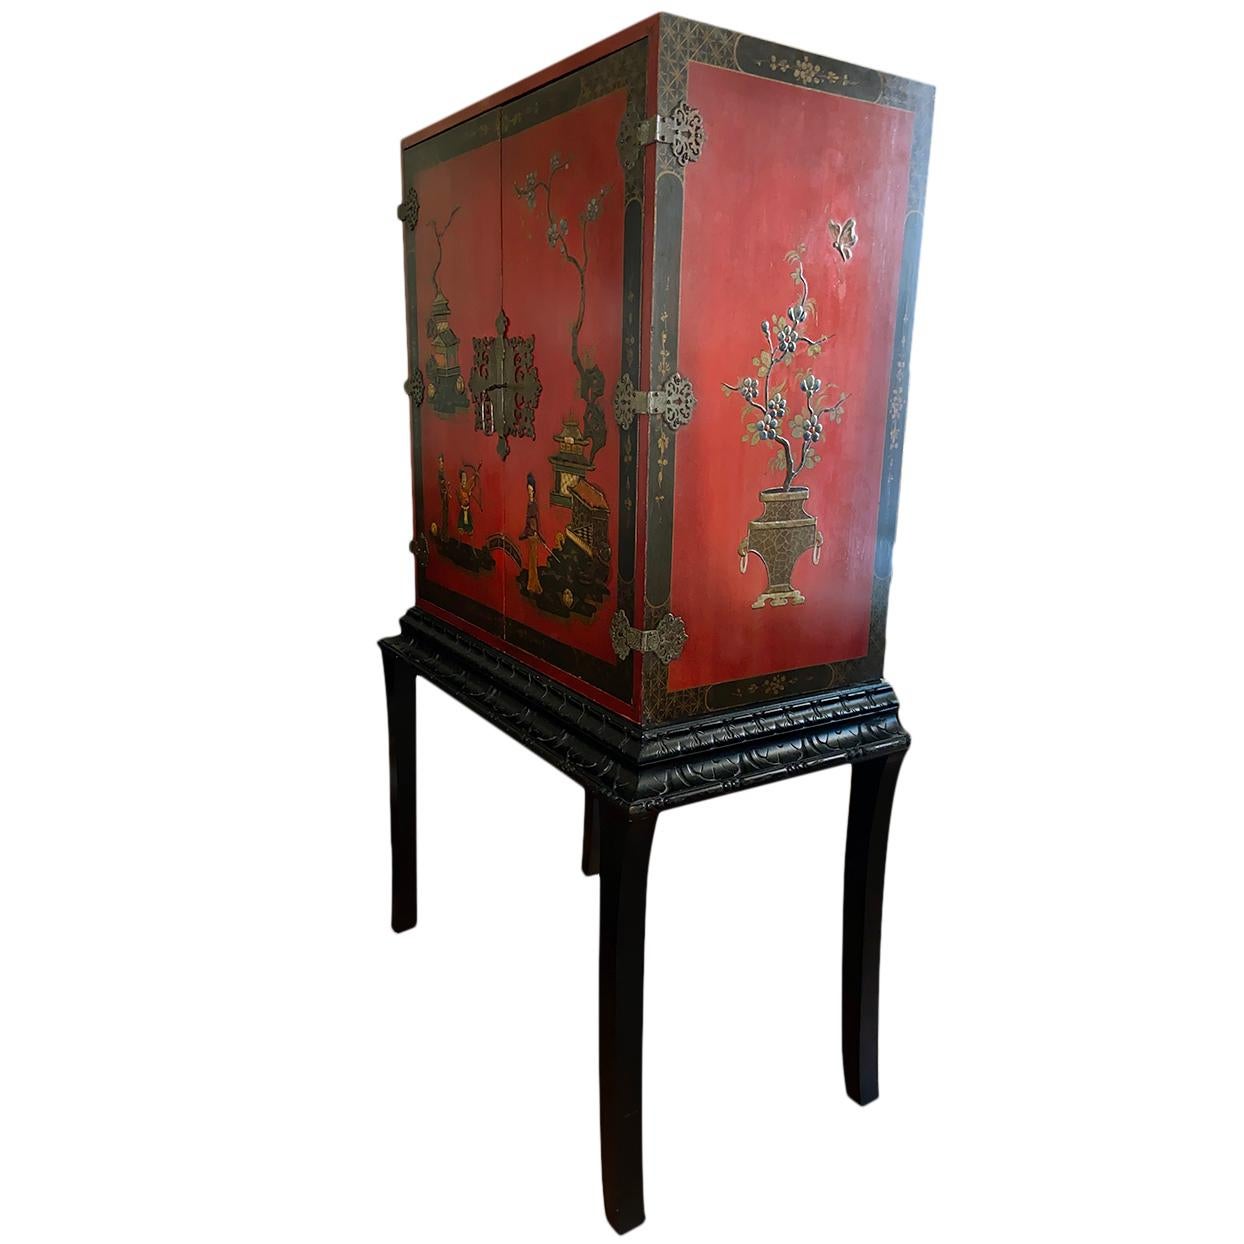 A circa 1920's English red lacquered Chinoiserie cabinet with gilt details.

Measurements:
Height: 61.25